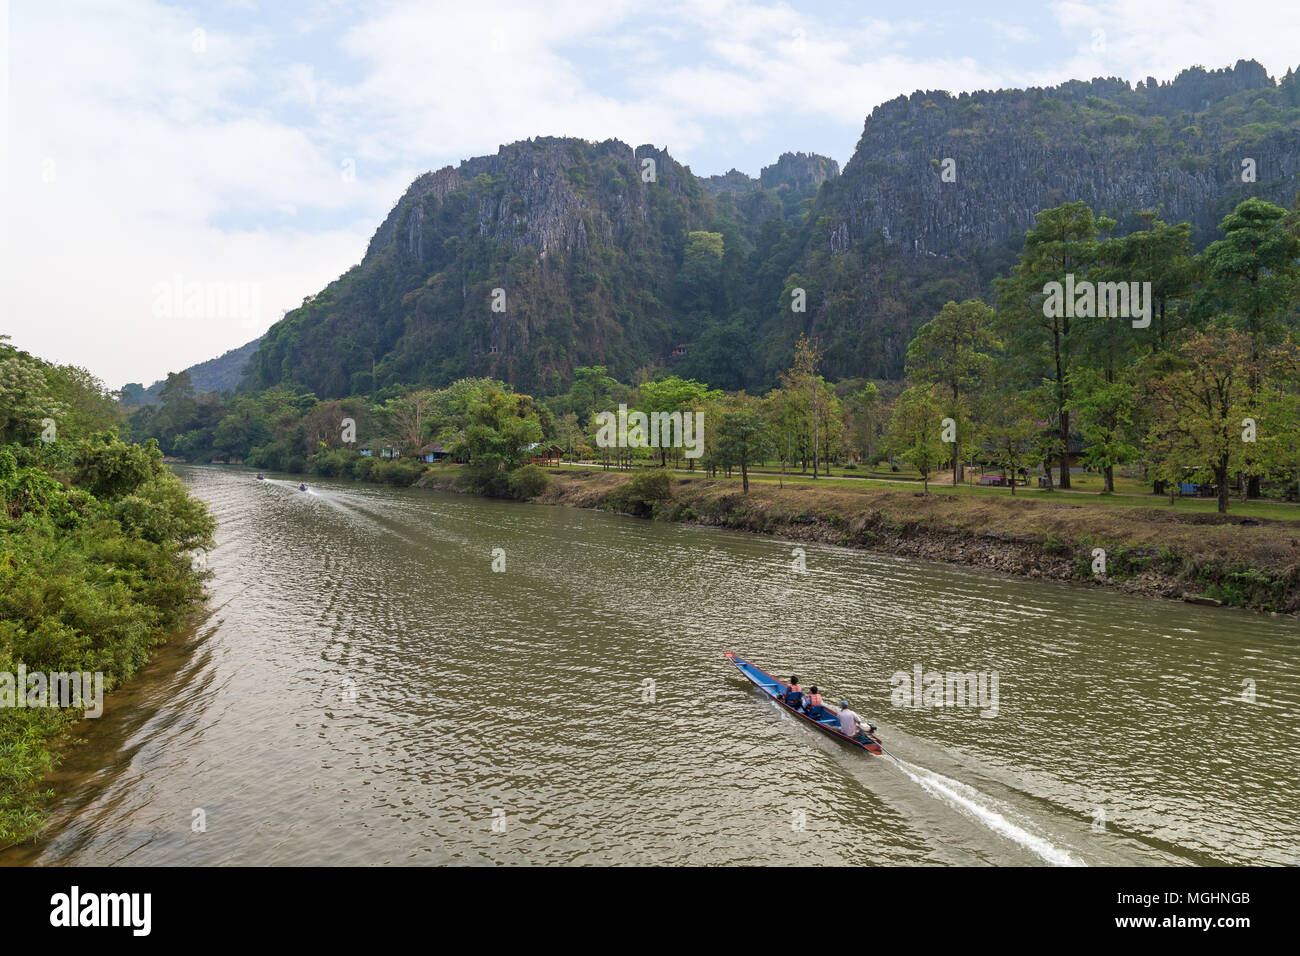 View of three small boats on the Nam Song River and limestone karst mountains near the Tham Chang (or Jang or Jung) Cave in Vang Vieng, Laos. Stock Photo